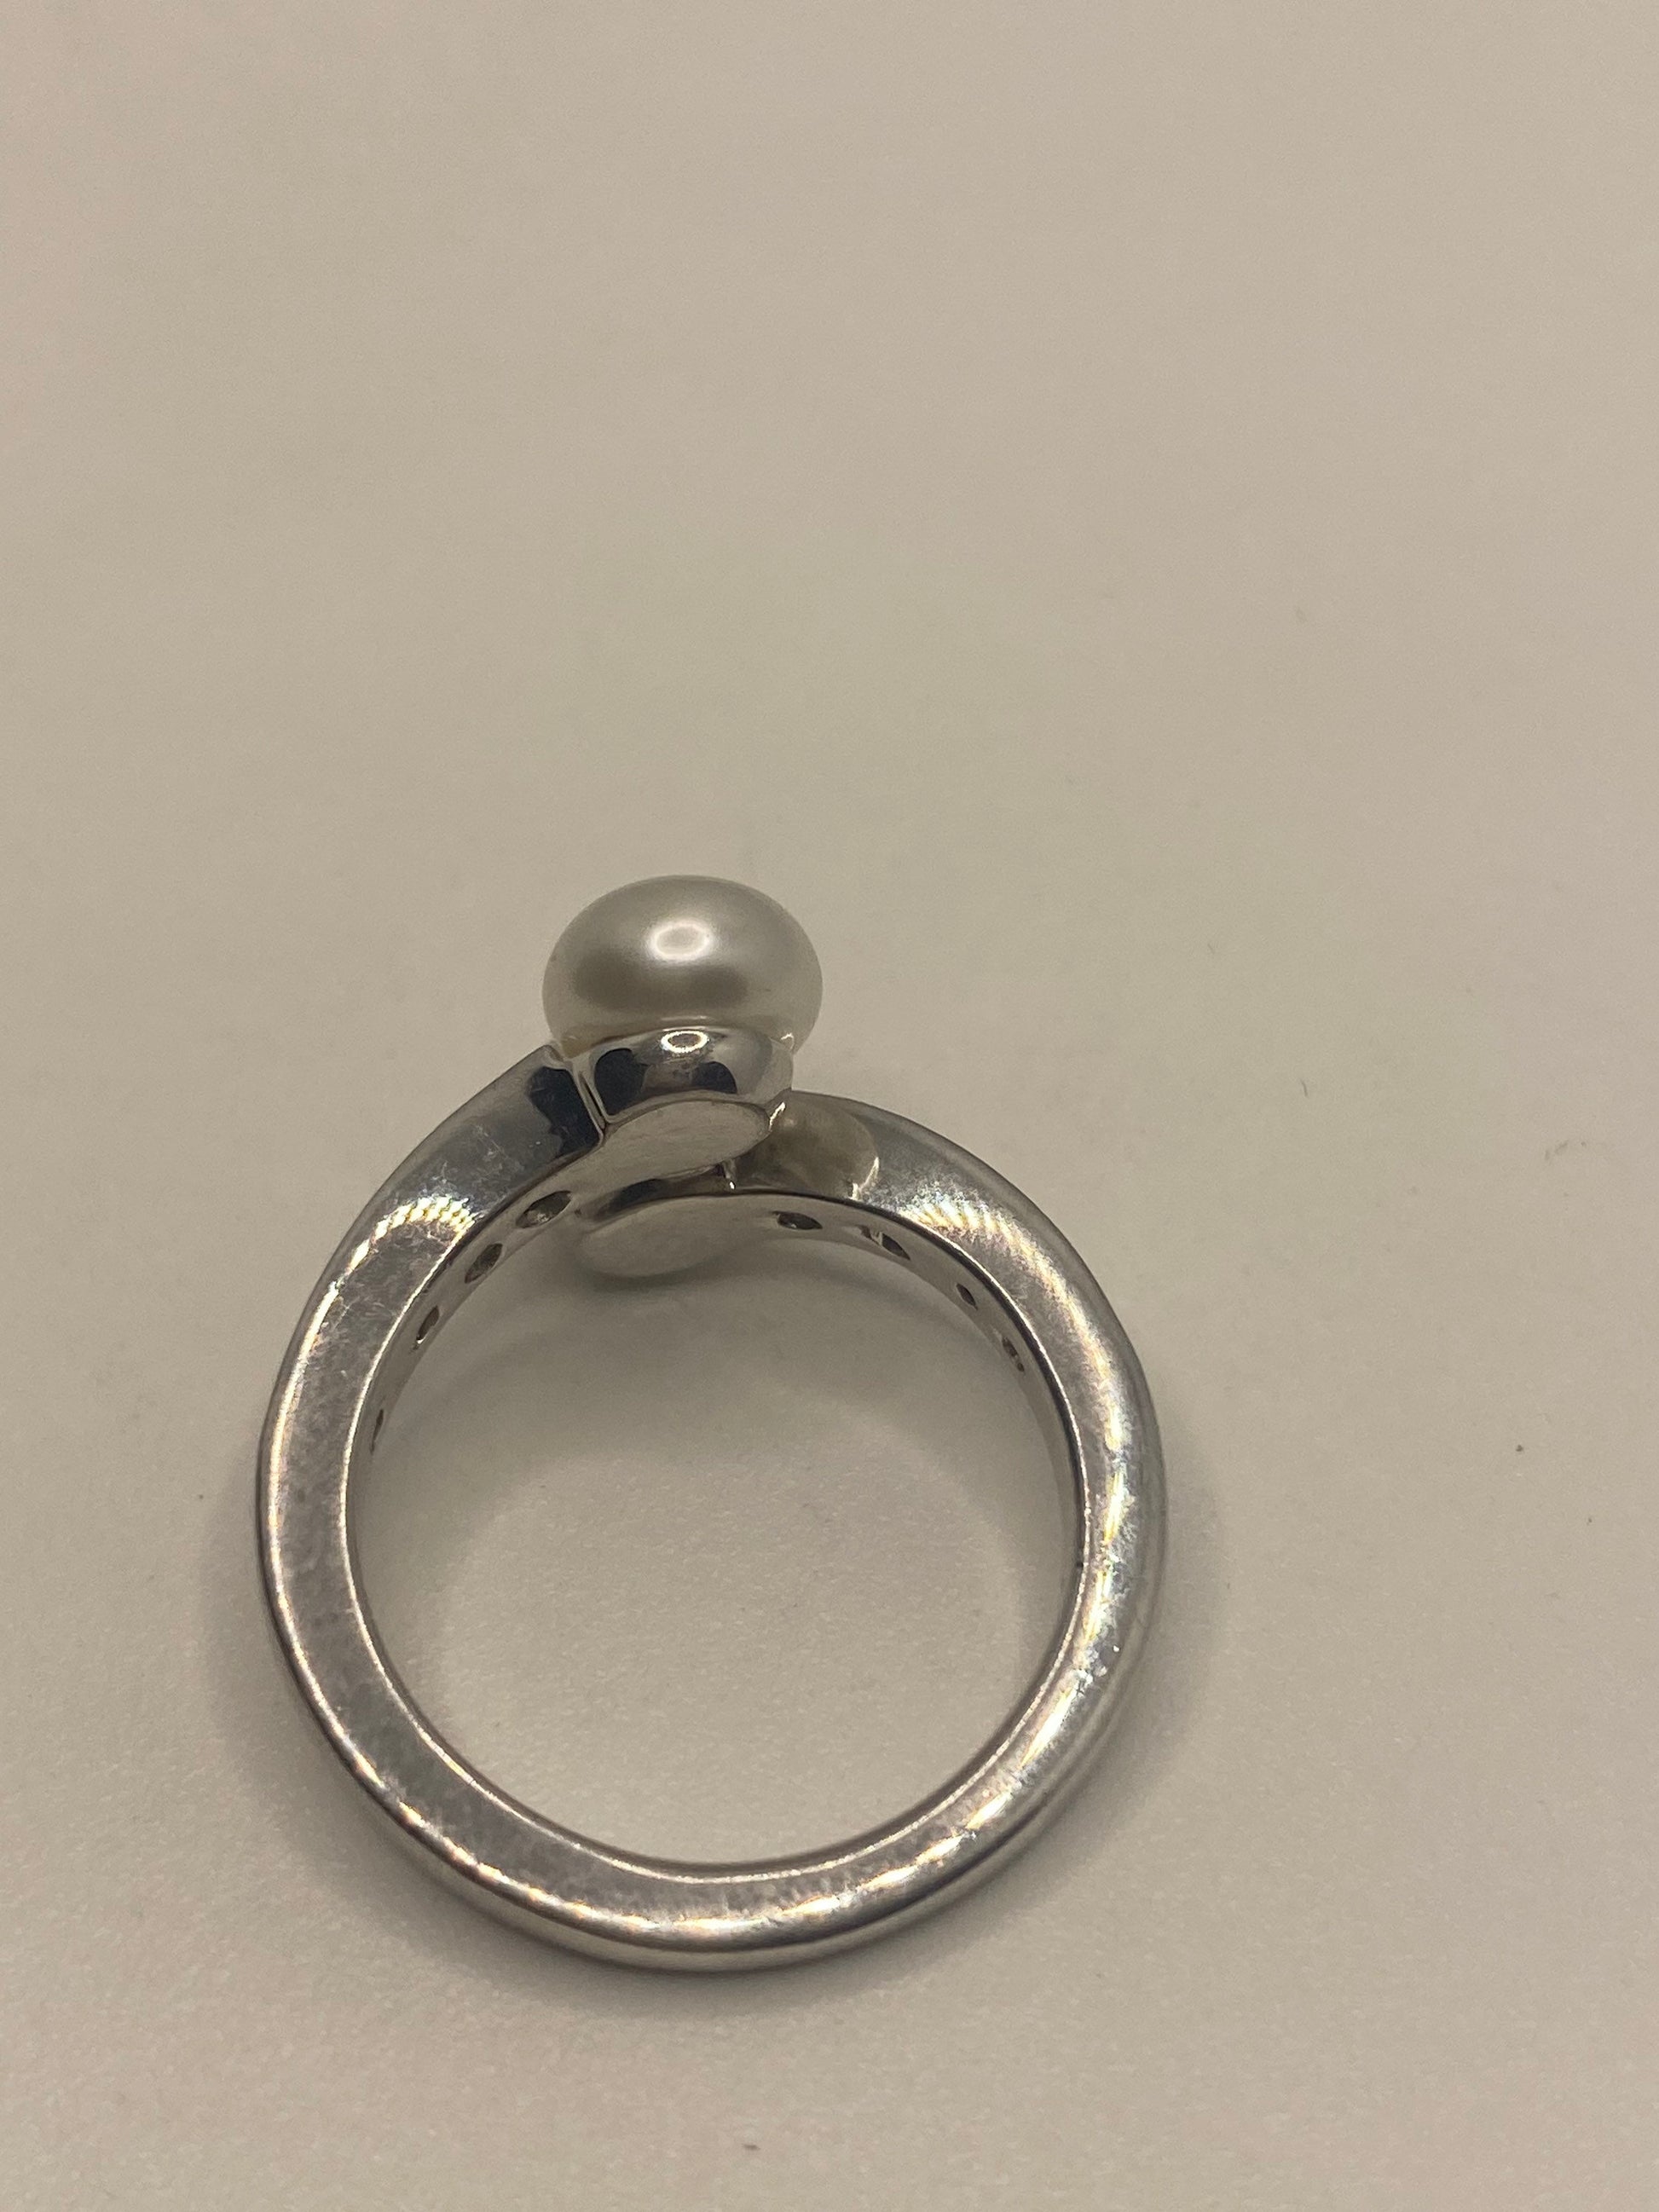 Vintage White Pearl 925 Sterling Silver Cocktail Ring Size 6.5